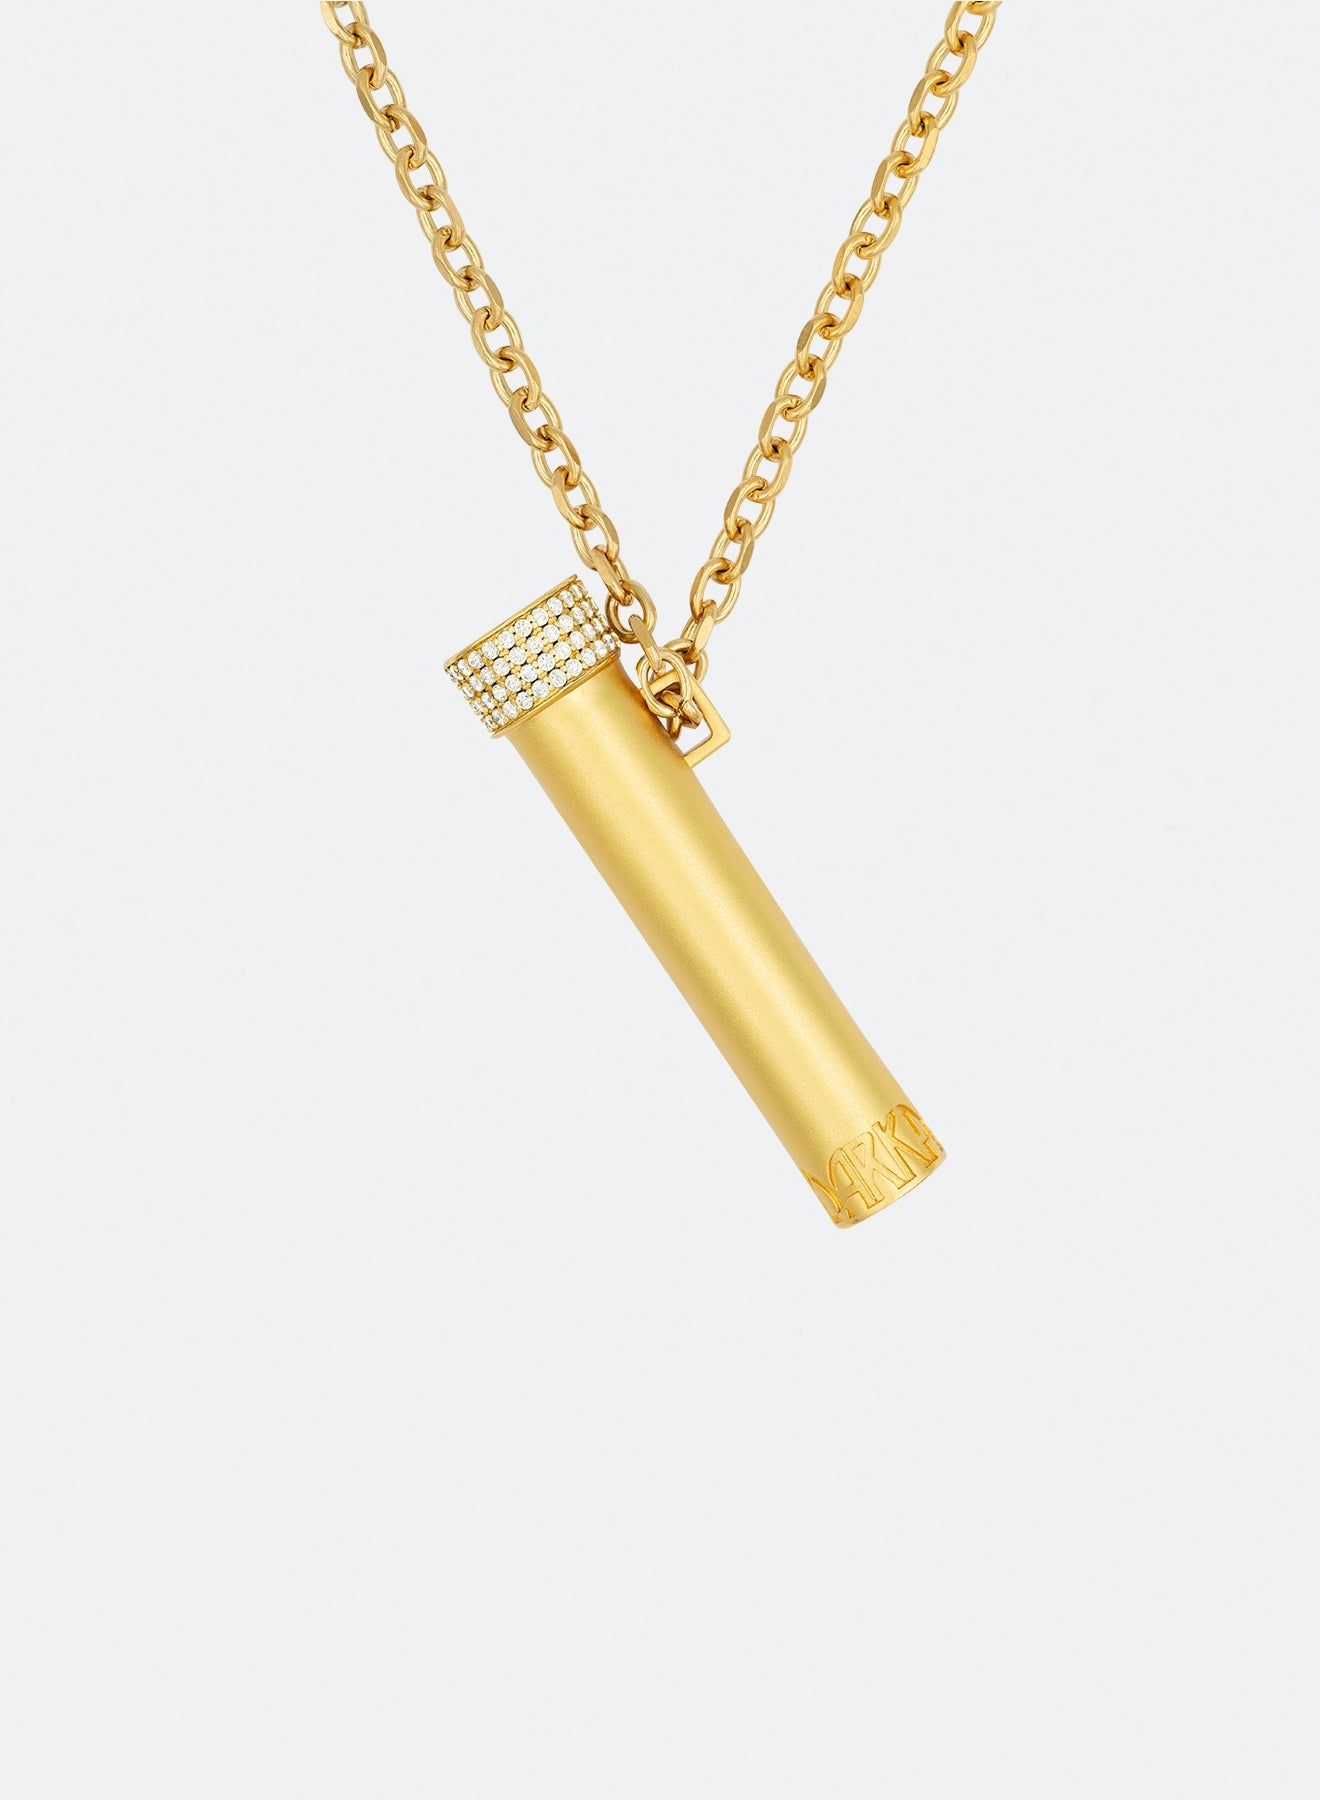 18k yellow gold coated vial pendant necklace with hand-set micropavé stones in white, matte/satined finishing and 3mm rolo chain